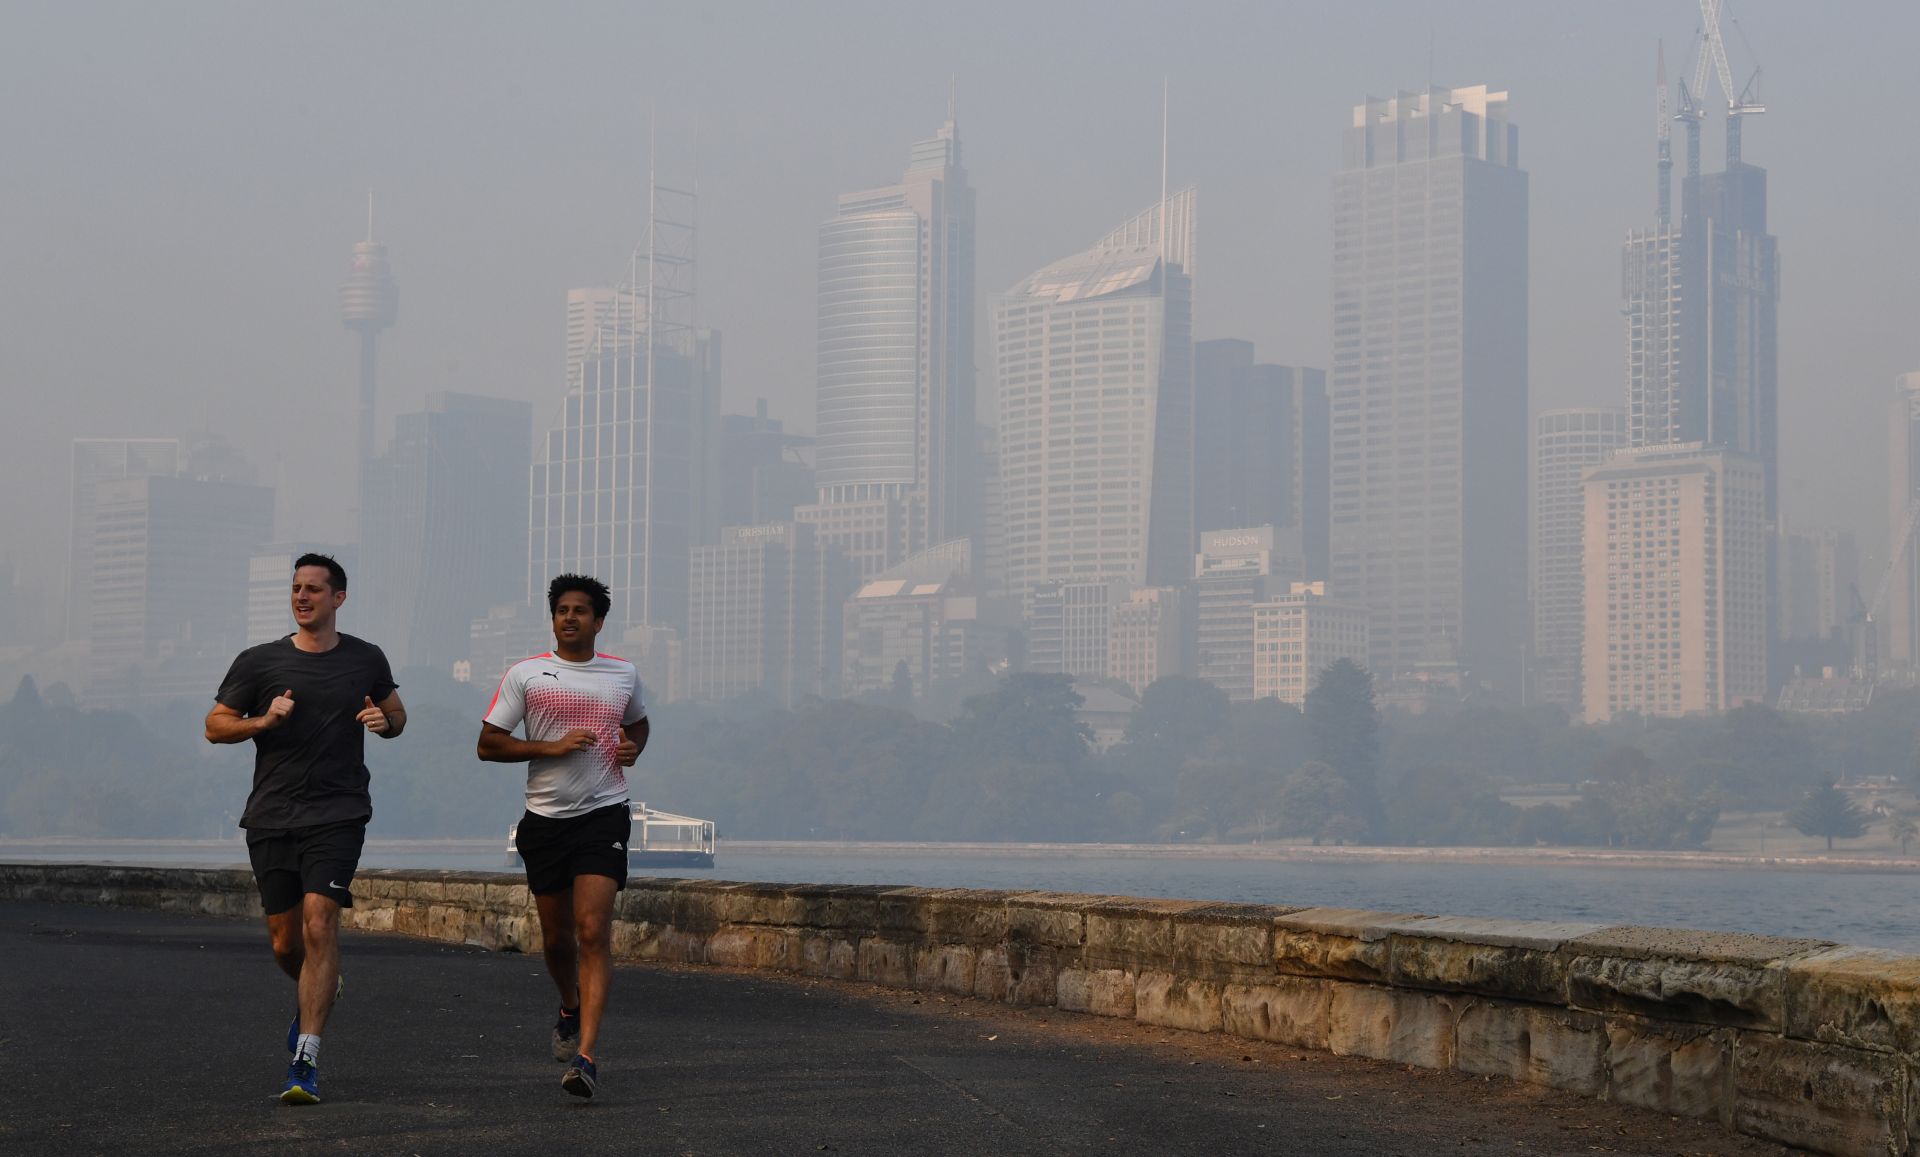 epa08012897 Thick smoke hangs in the sky in Sydney, Australia, 21 November 2019. The smoke comes from the Gospers Mountain fire north west of Sydney, which has been burning for over a week now, and has burnt more than 160,000 hectares of land.  EPA/DEAN LEWINS  AUSTRALIA AND NEW ZEALAND OUT